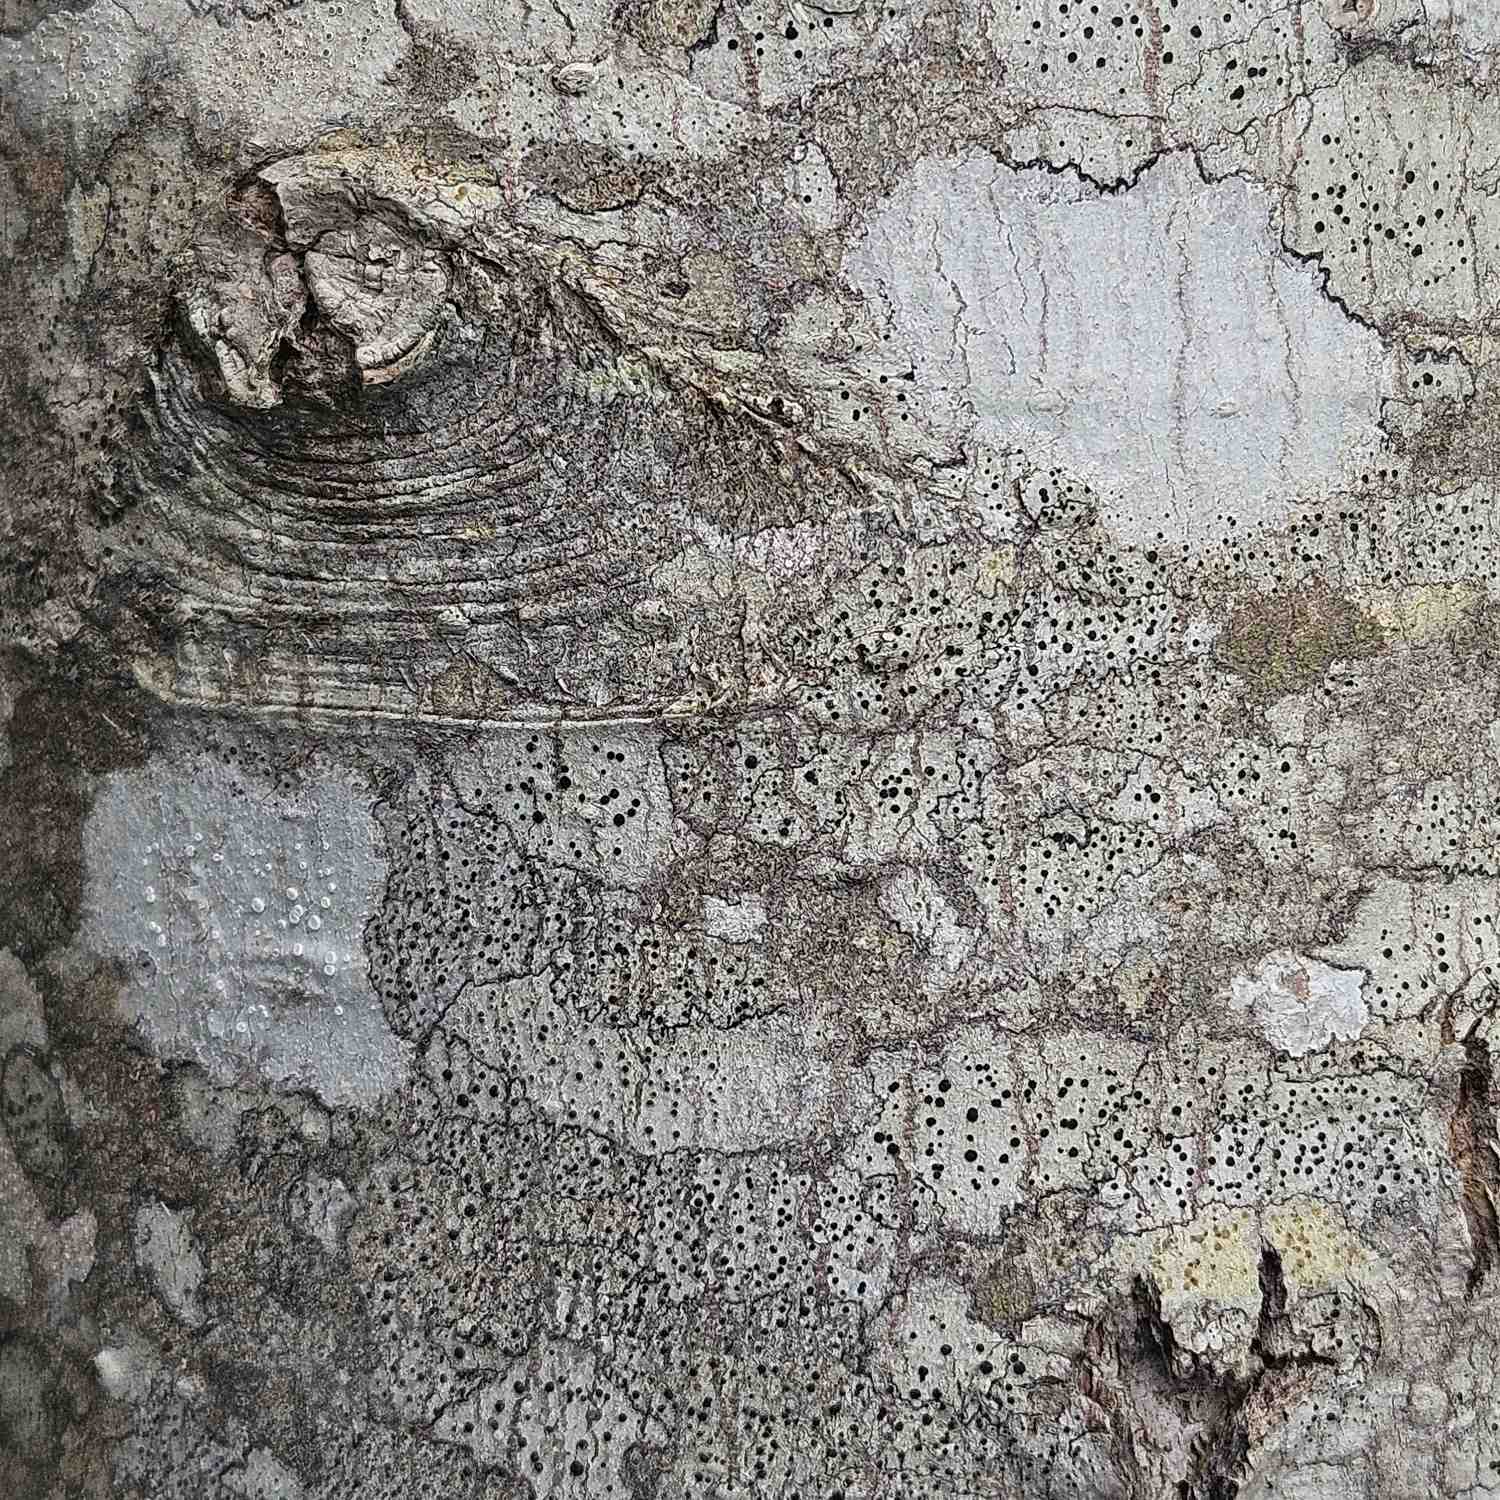 a picture of lichens growing on maple bark